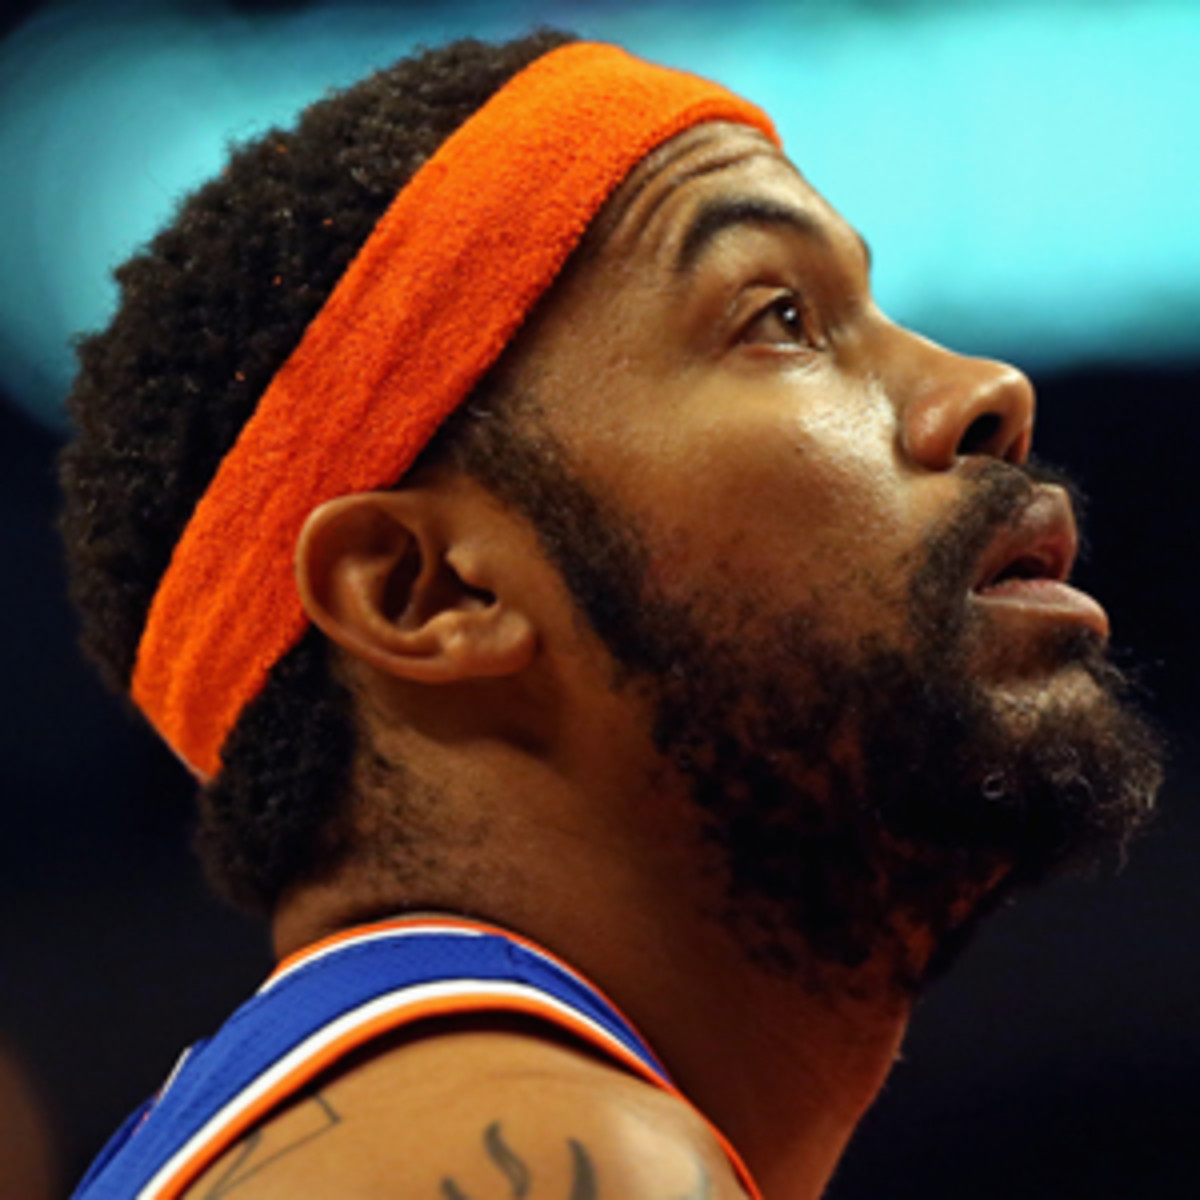 Rasheed Wallace has missed 21 Knicks games with a stress fracture in his foot. (Jonathan Daniel/Getty Images)